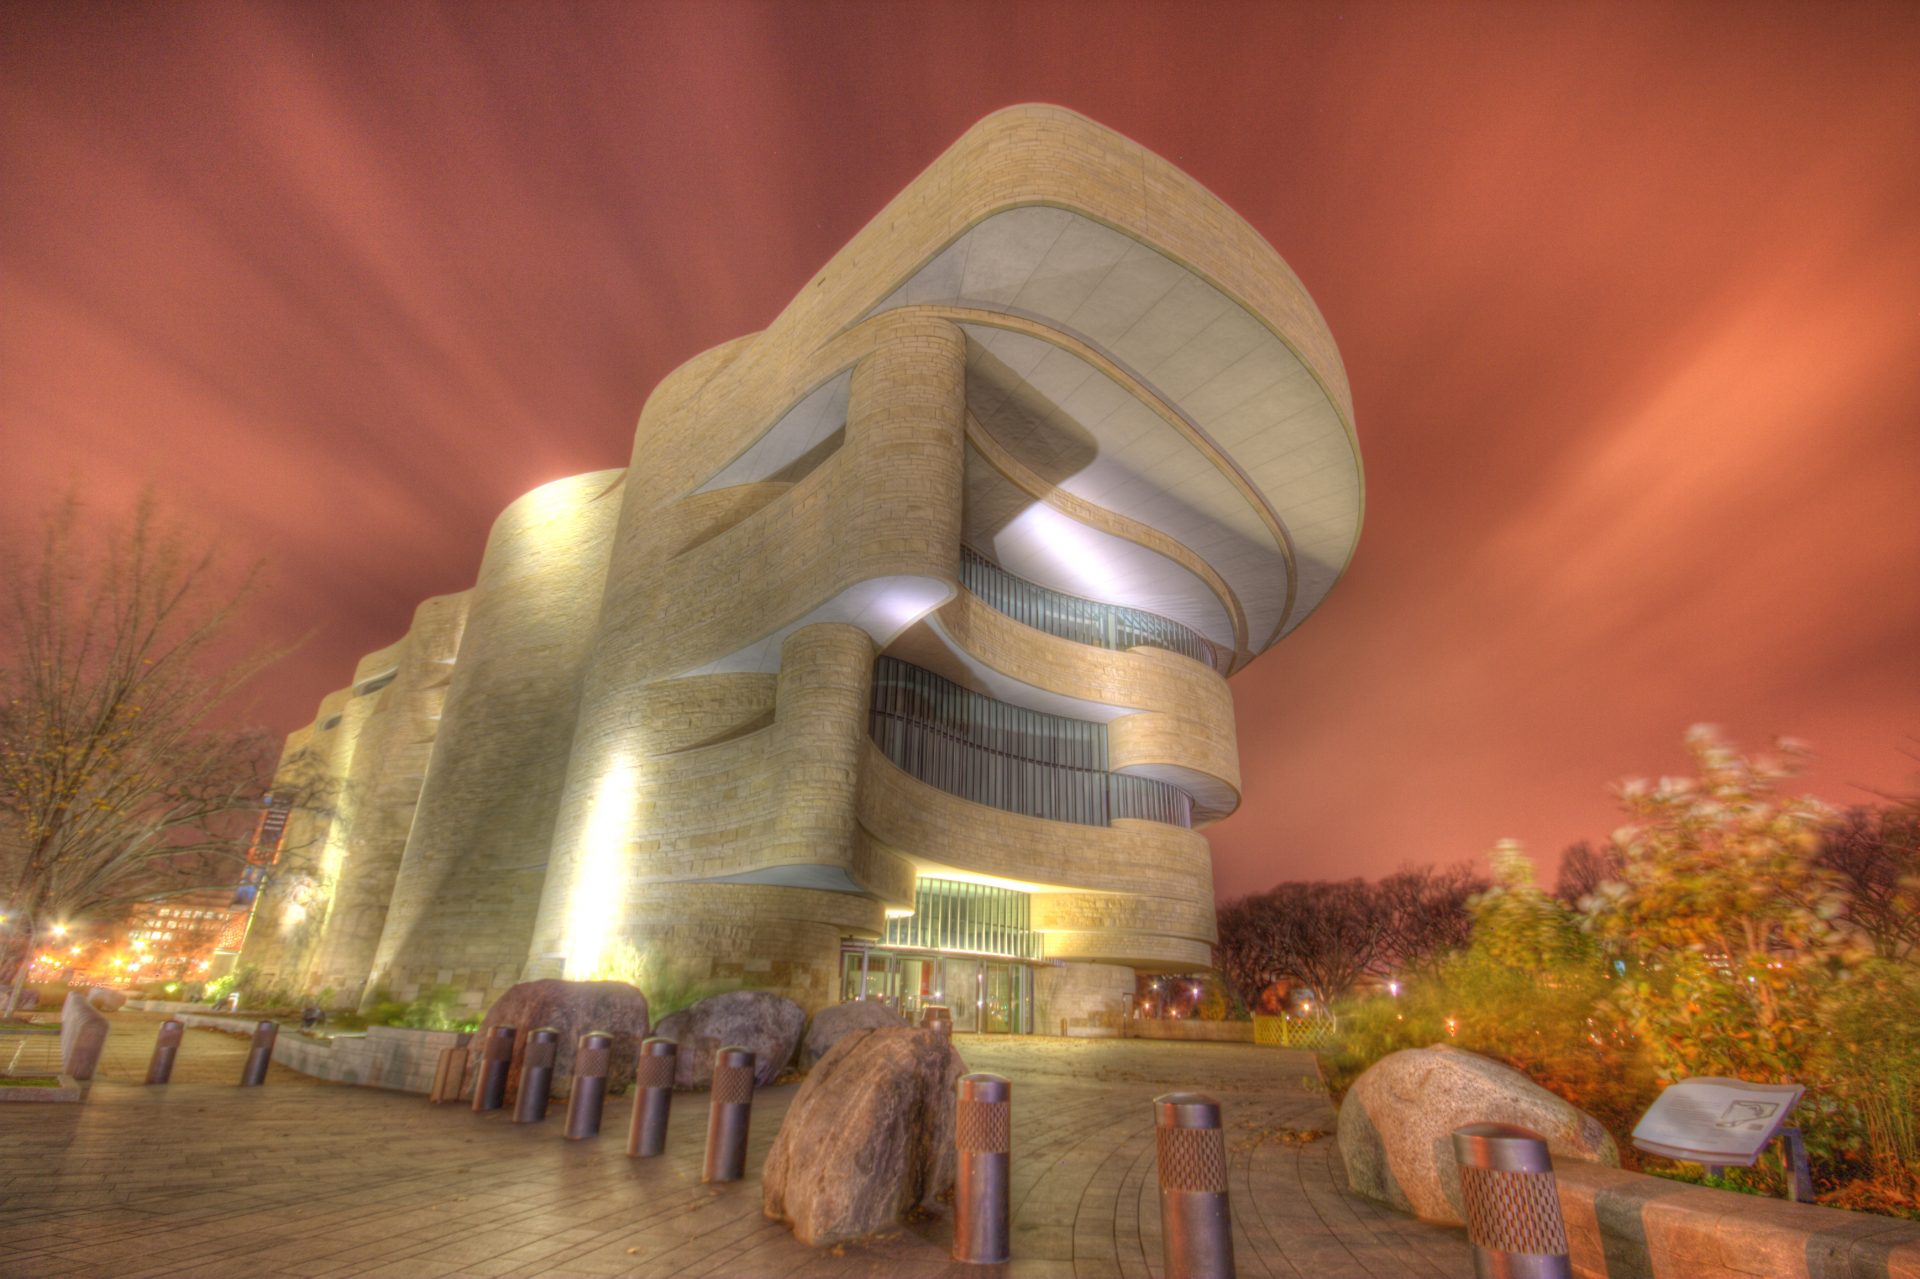 National Museum of the American Indian, Washington